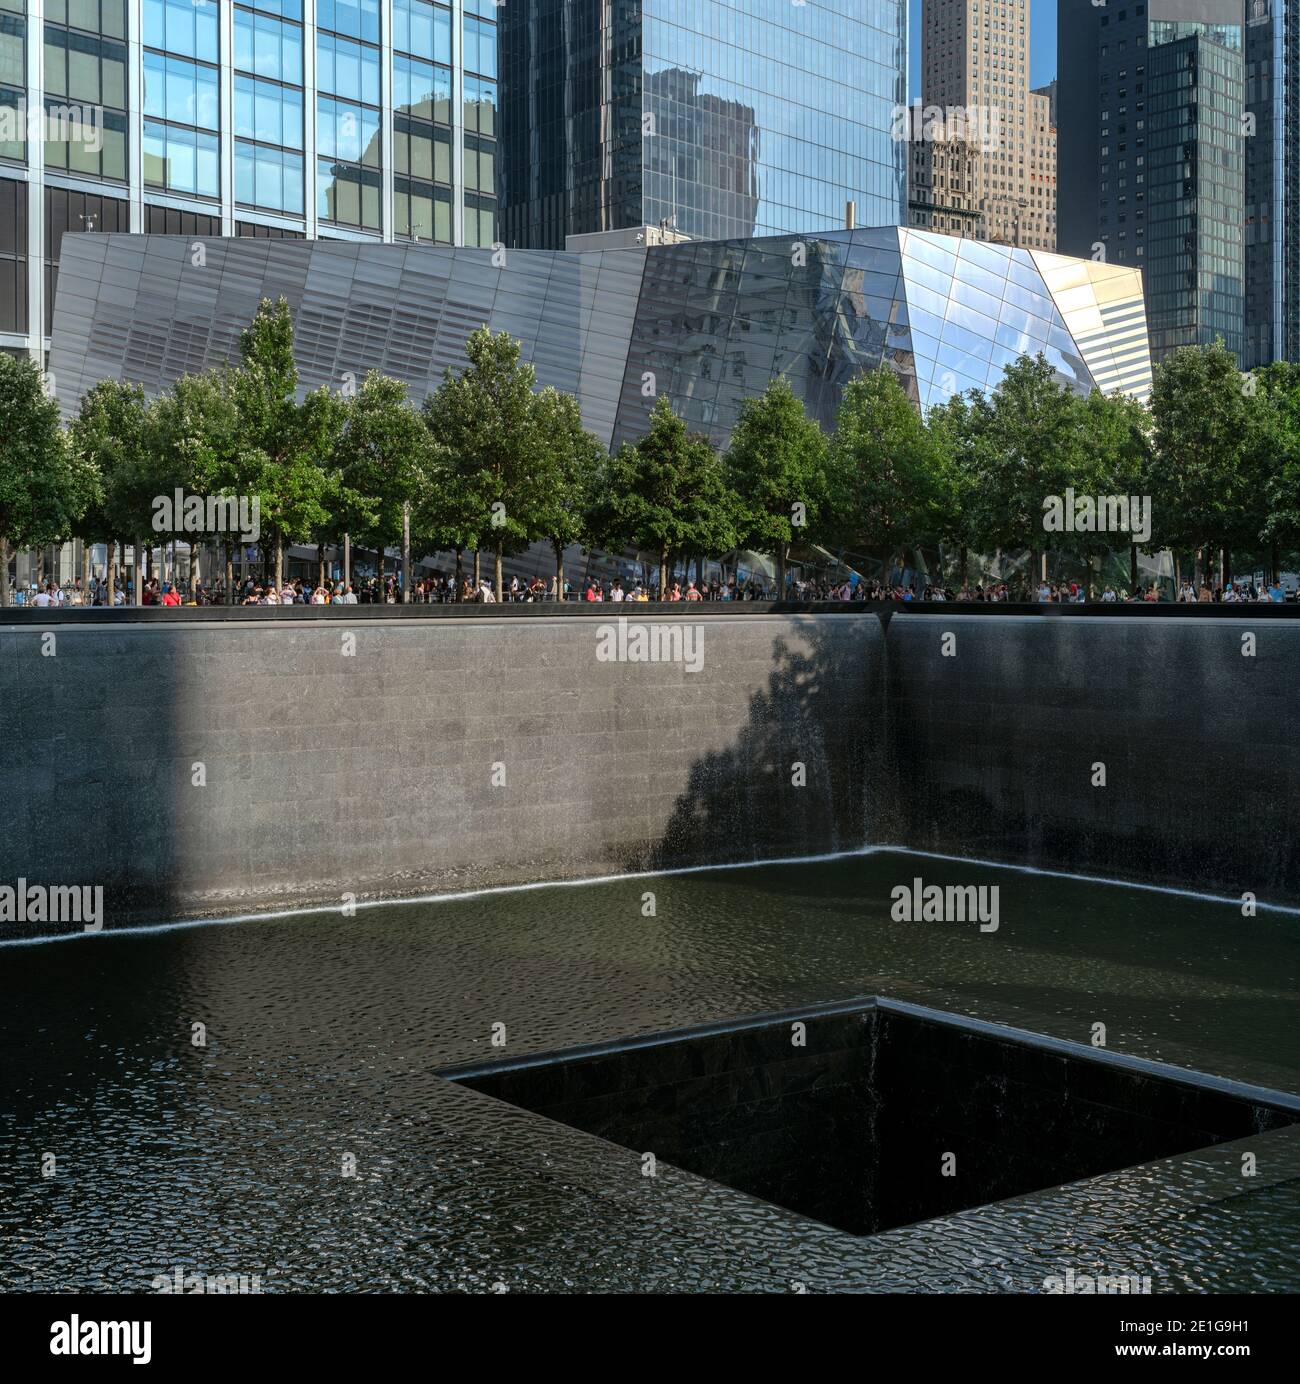 National September 11 Memorial & Museum, New York, USA. Completed in 2011. Stock Photo